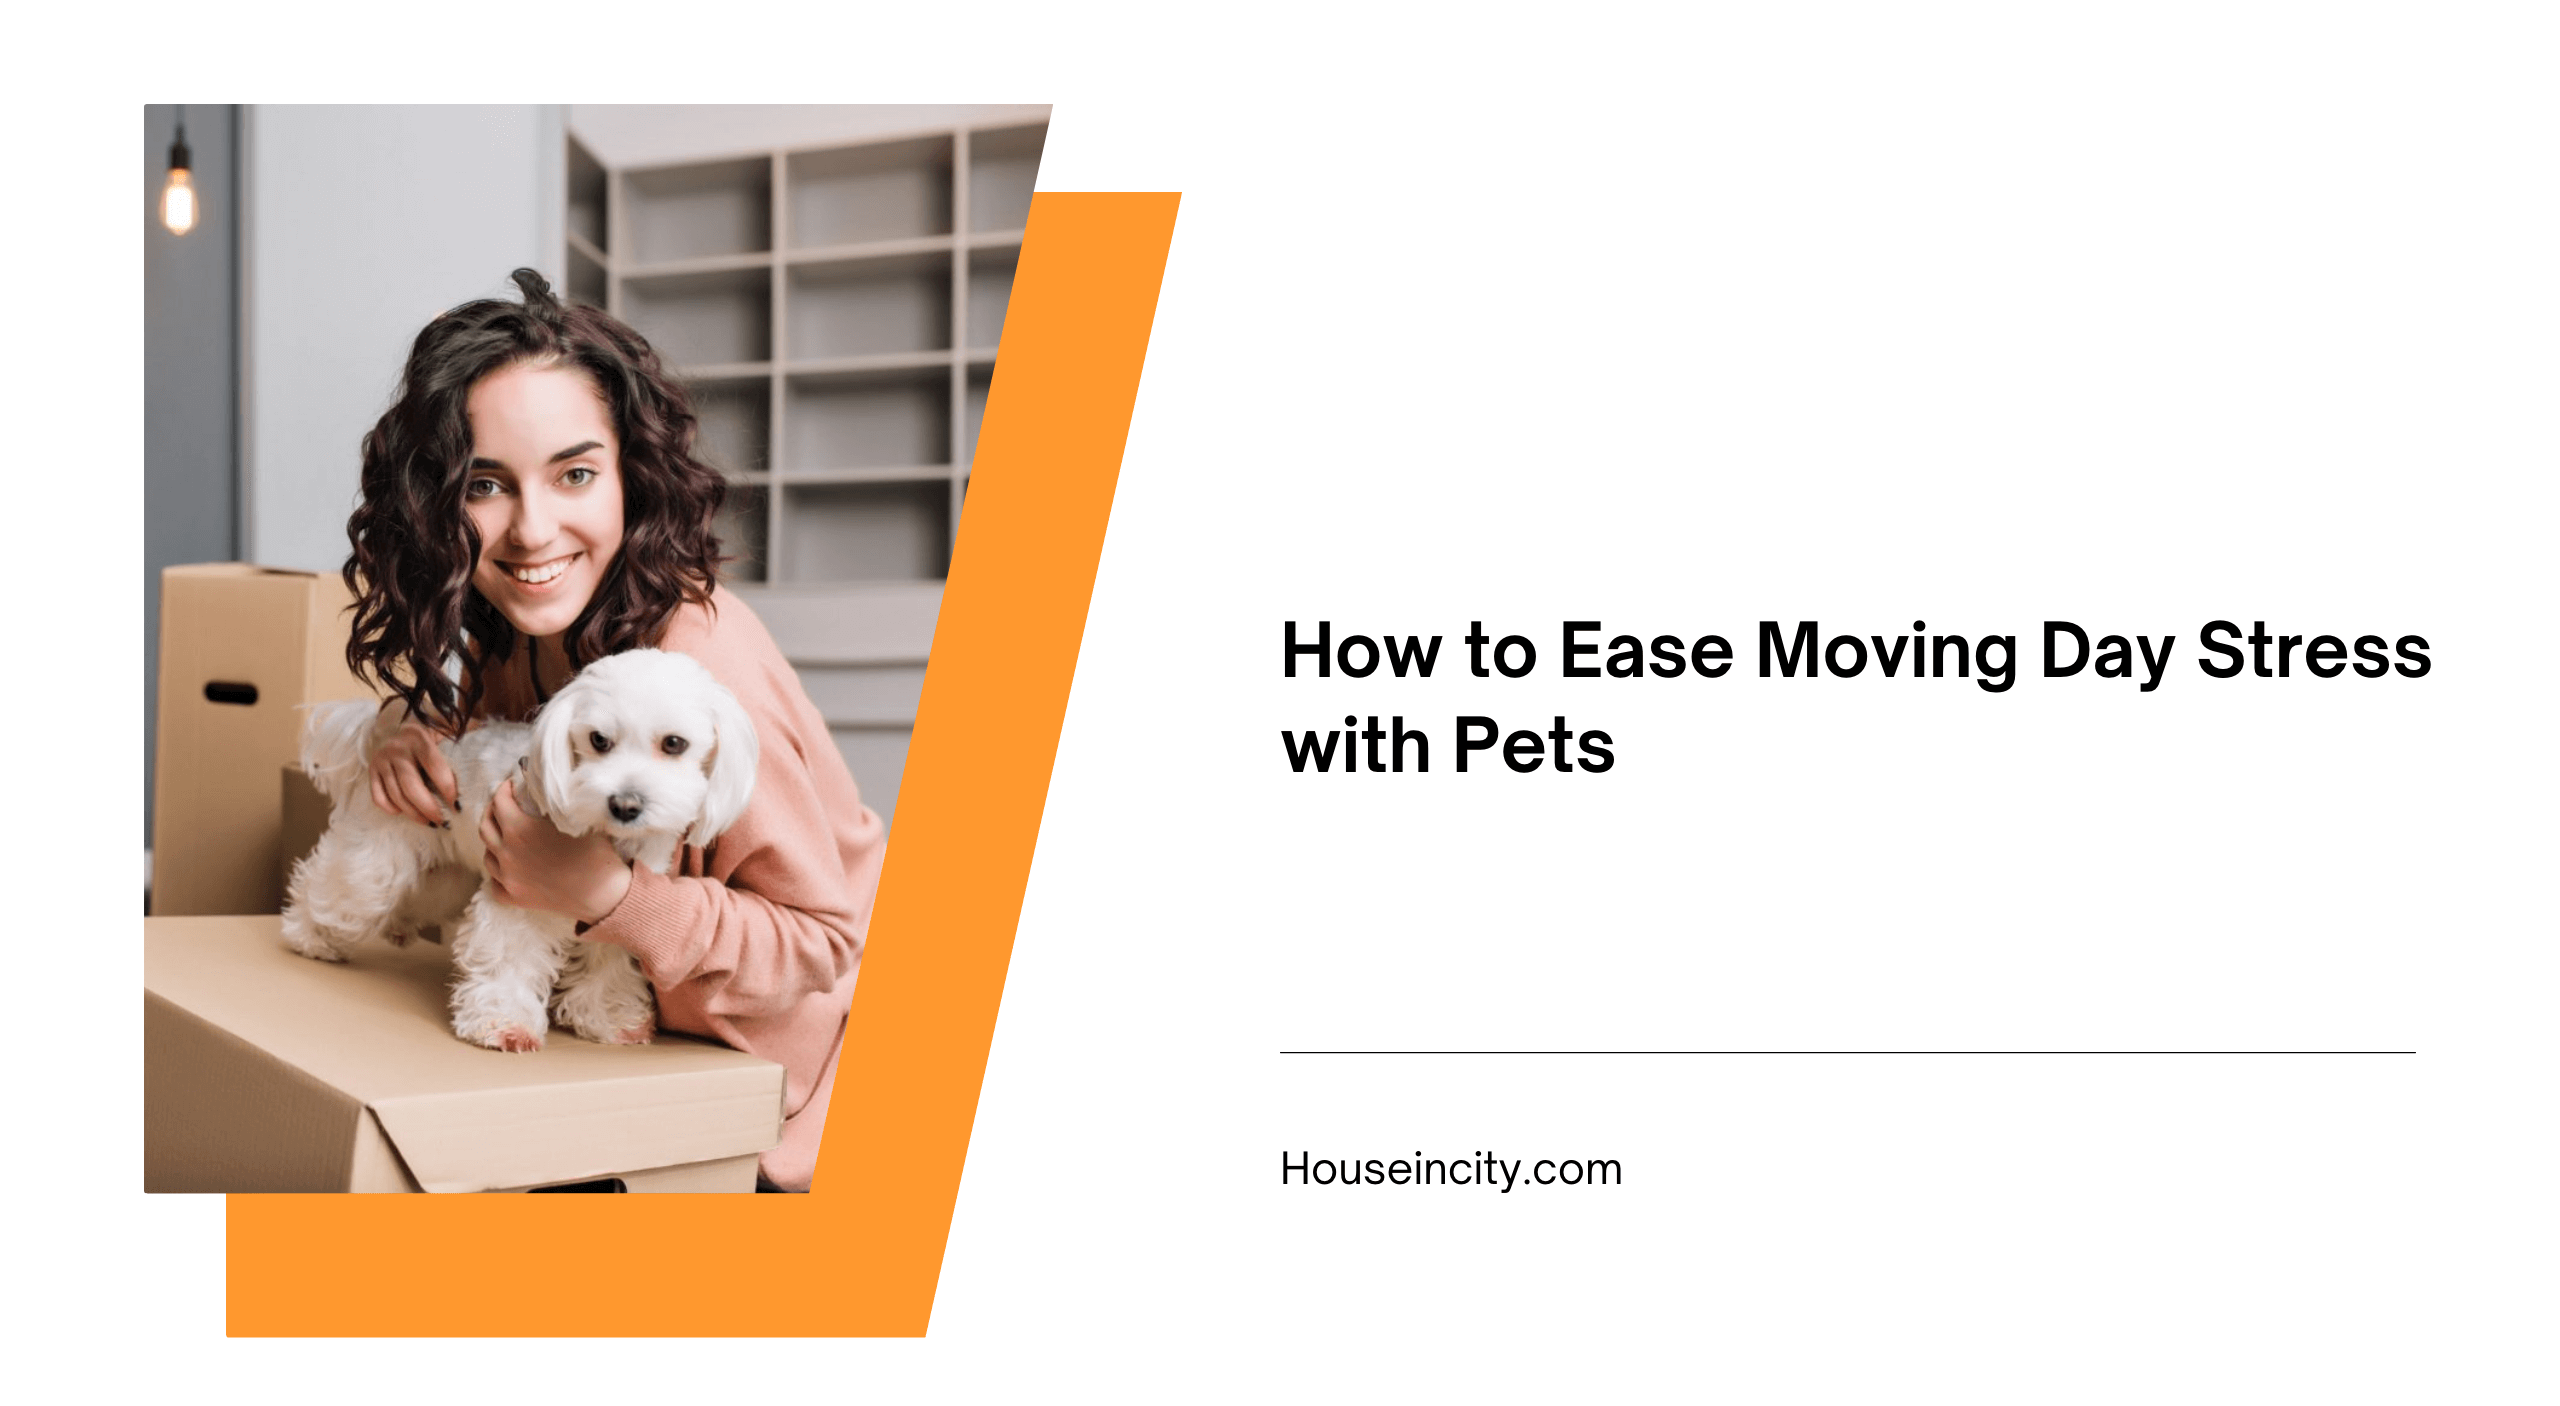 How to Ease Moving Day Stress with Pets